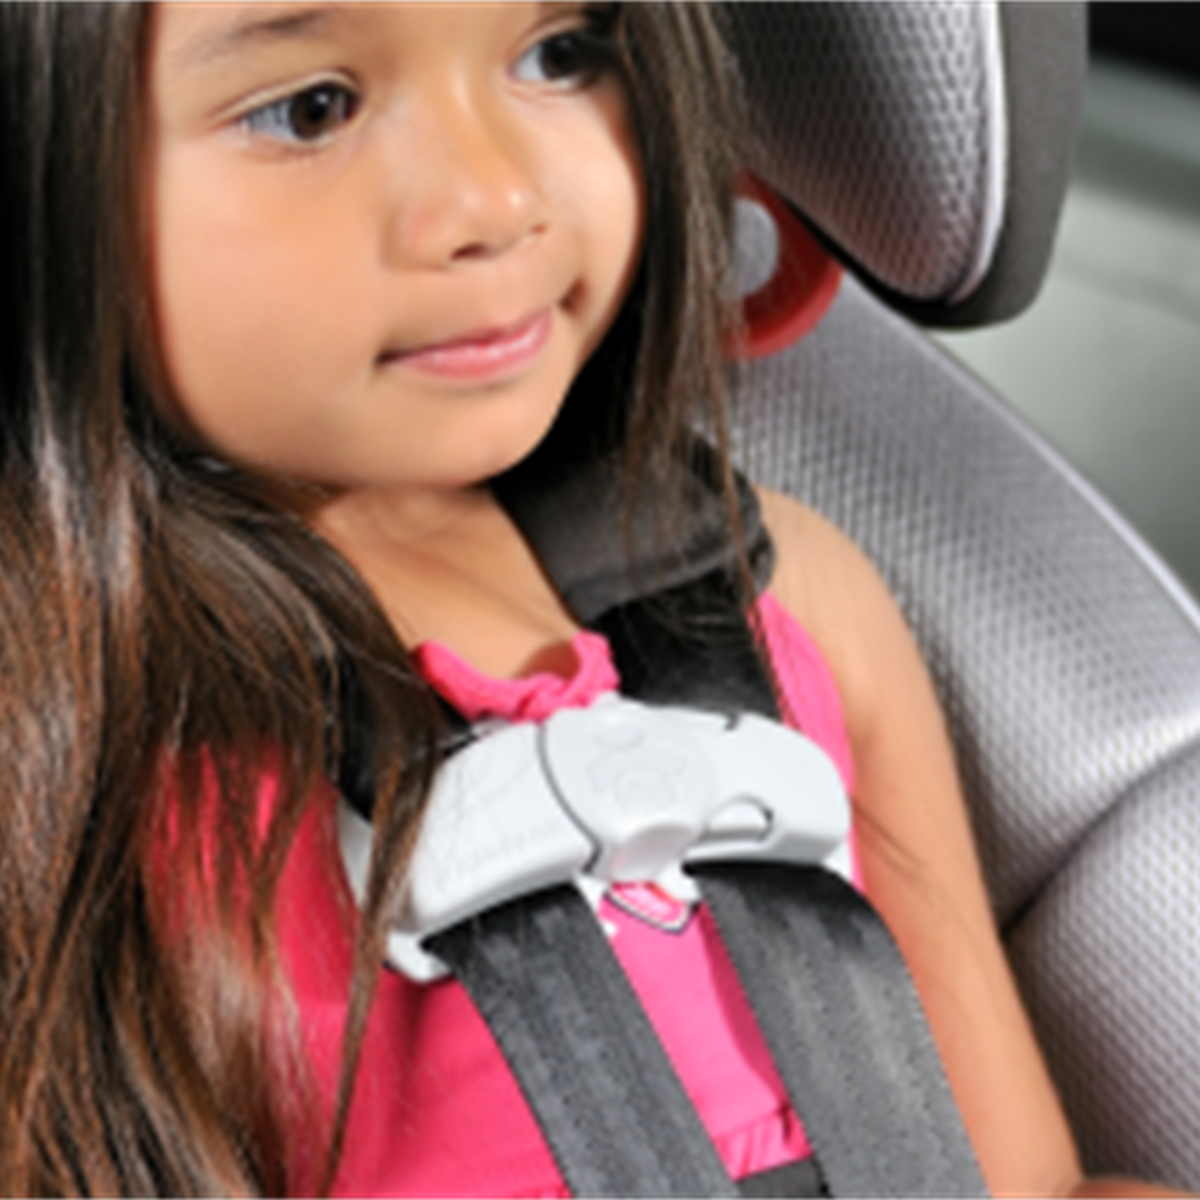 Car Seats Information For Families, What Are The Regulations For Forward Facing Car Seats